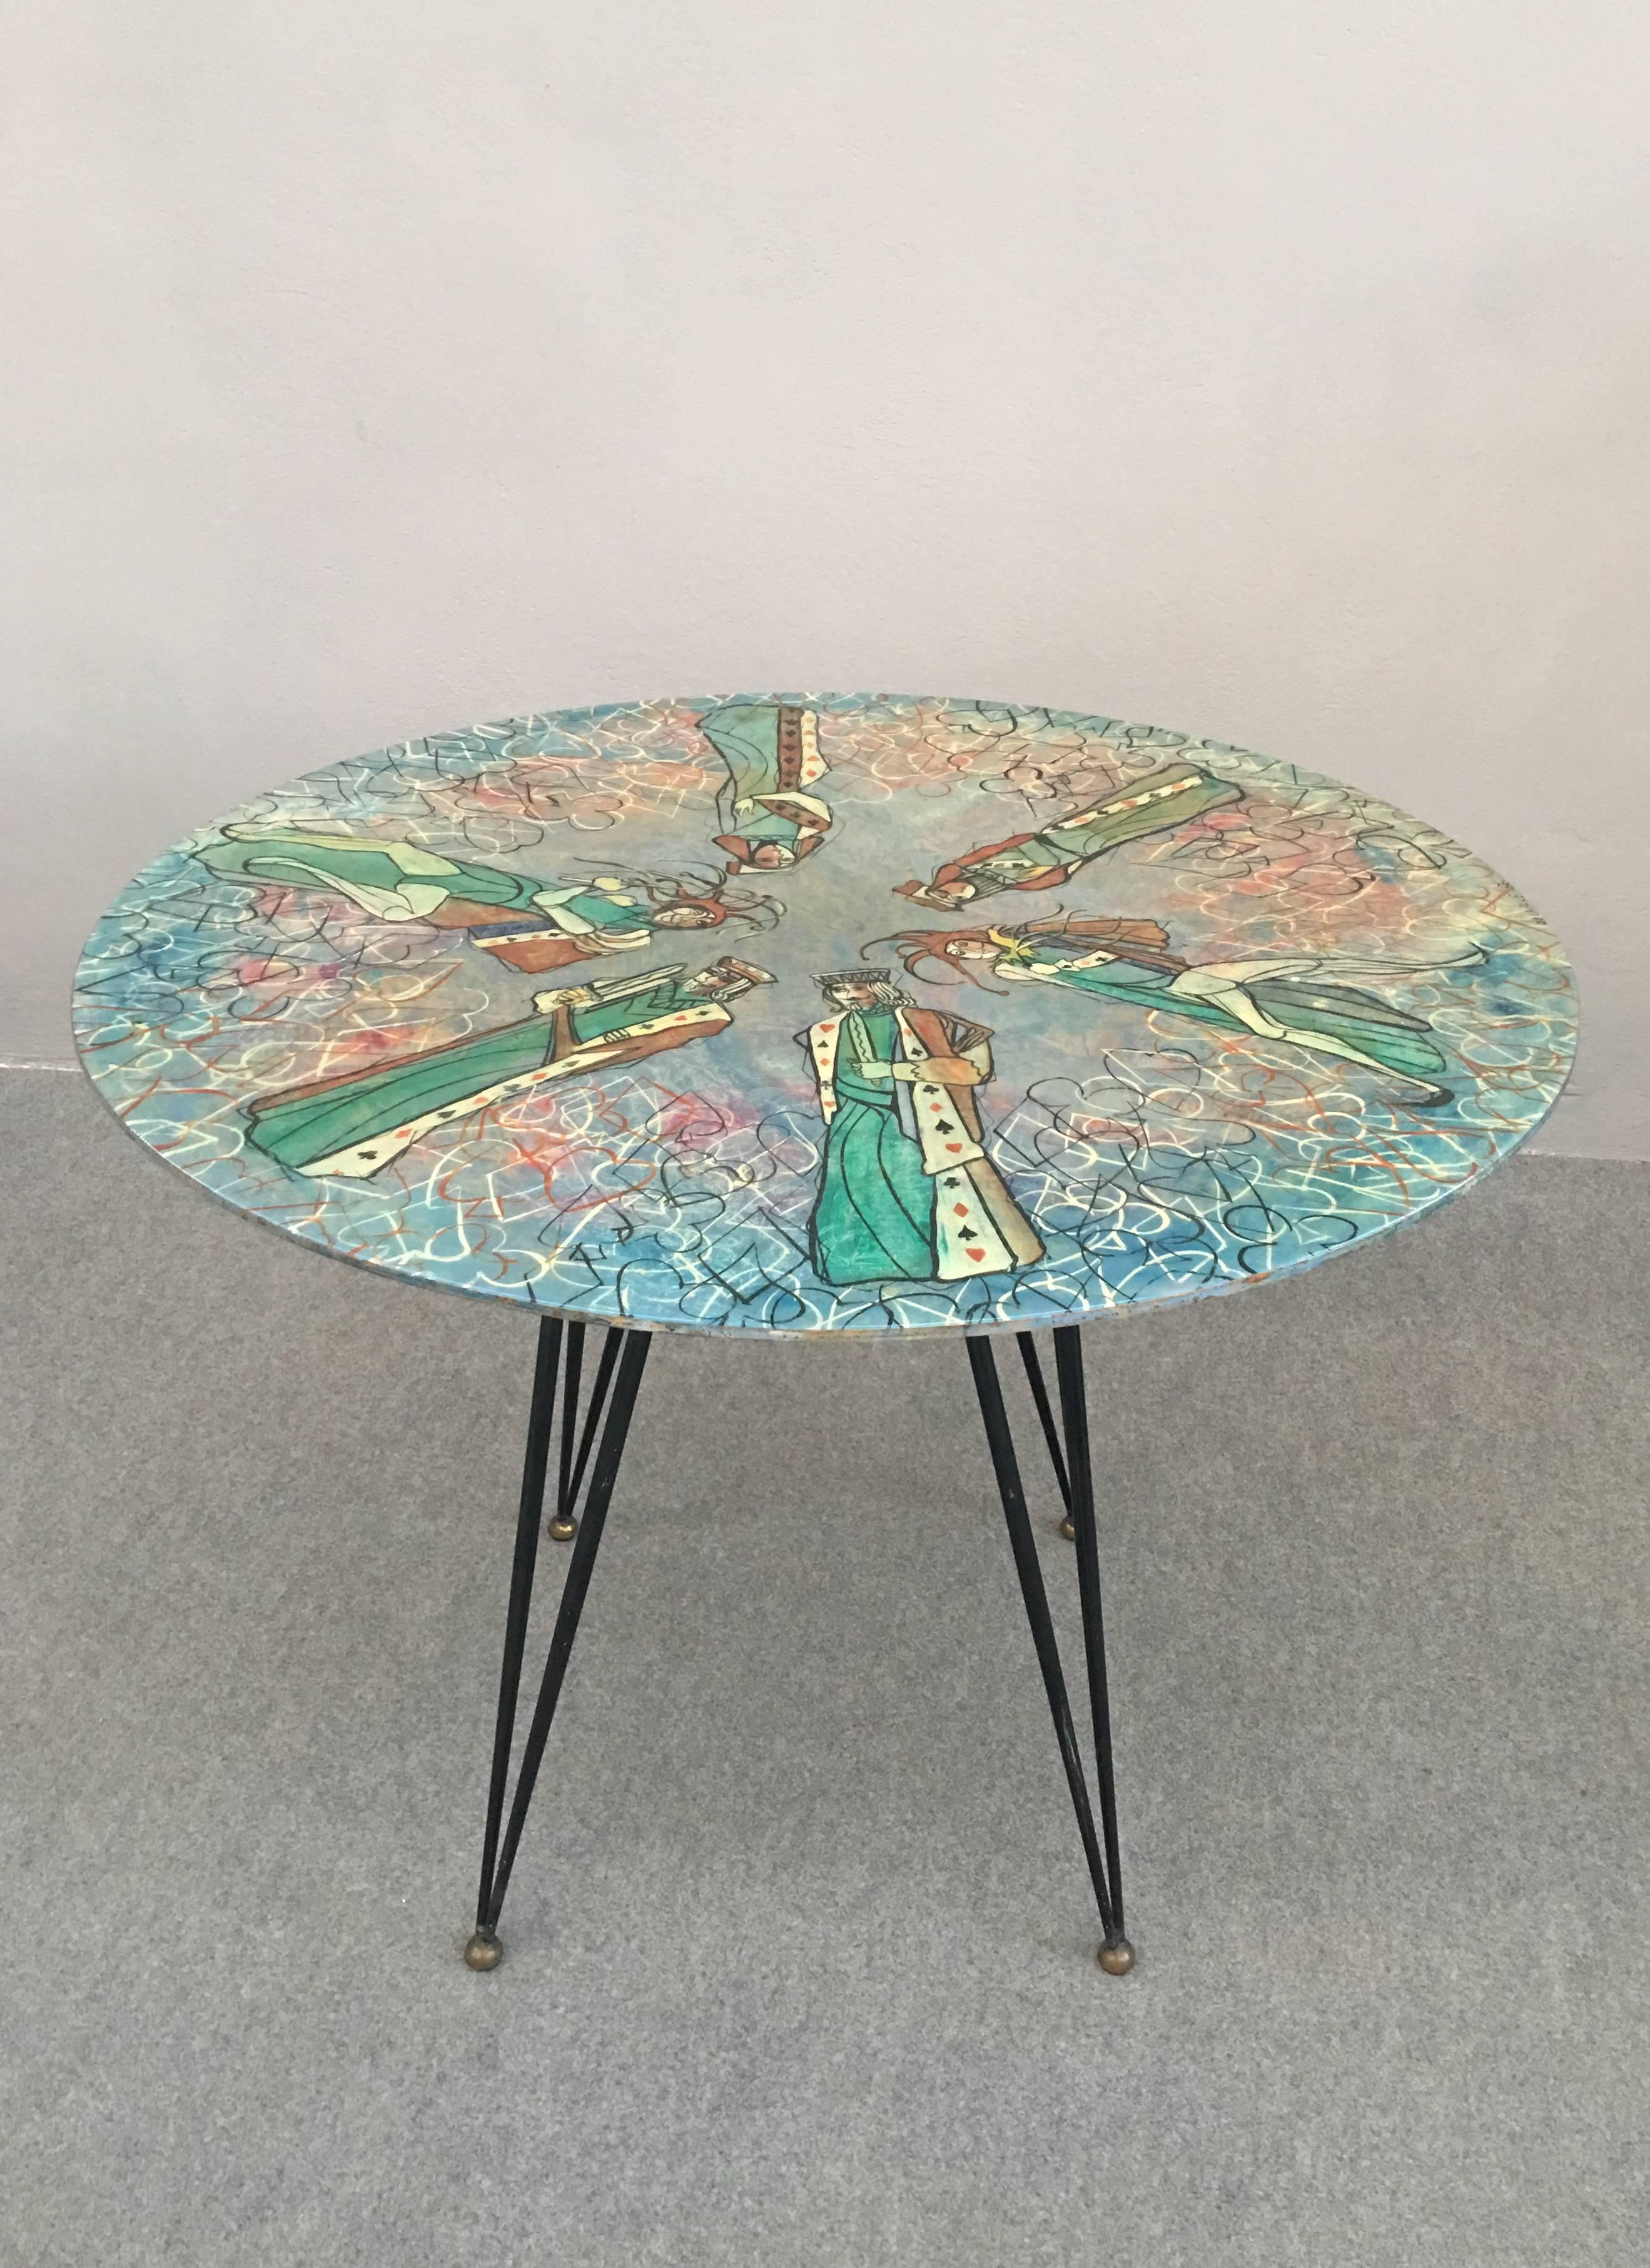 Italian Glamorous Table by Decalage, Signed